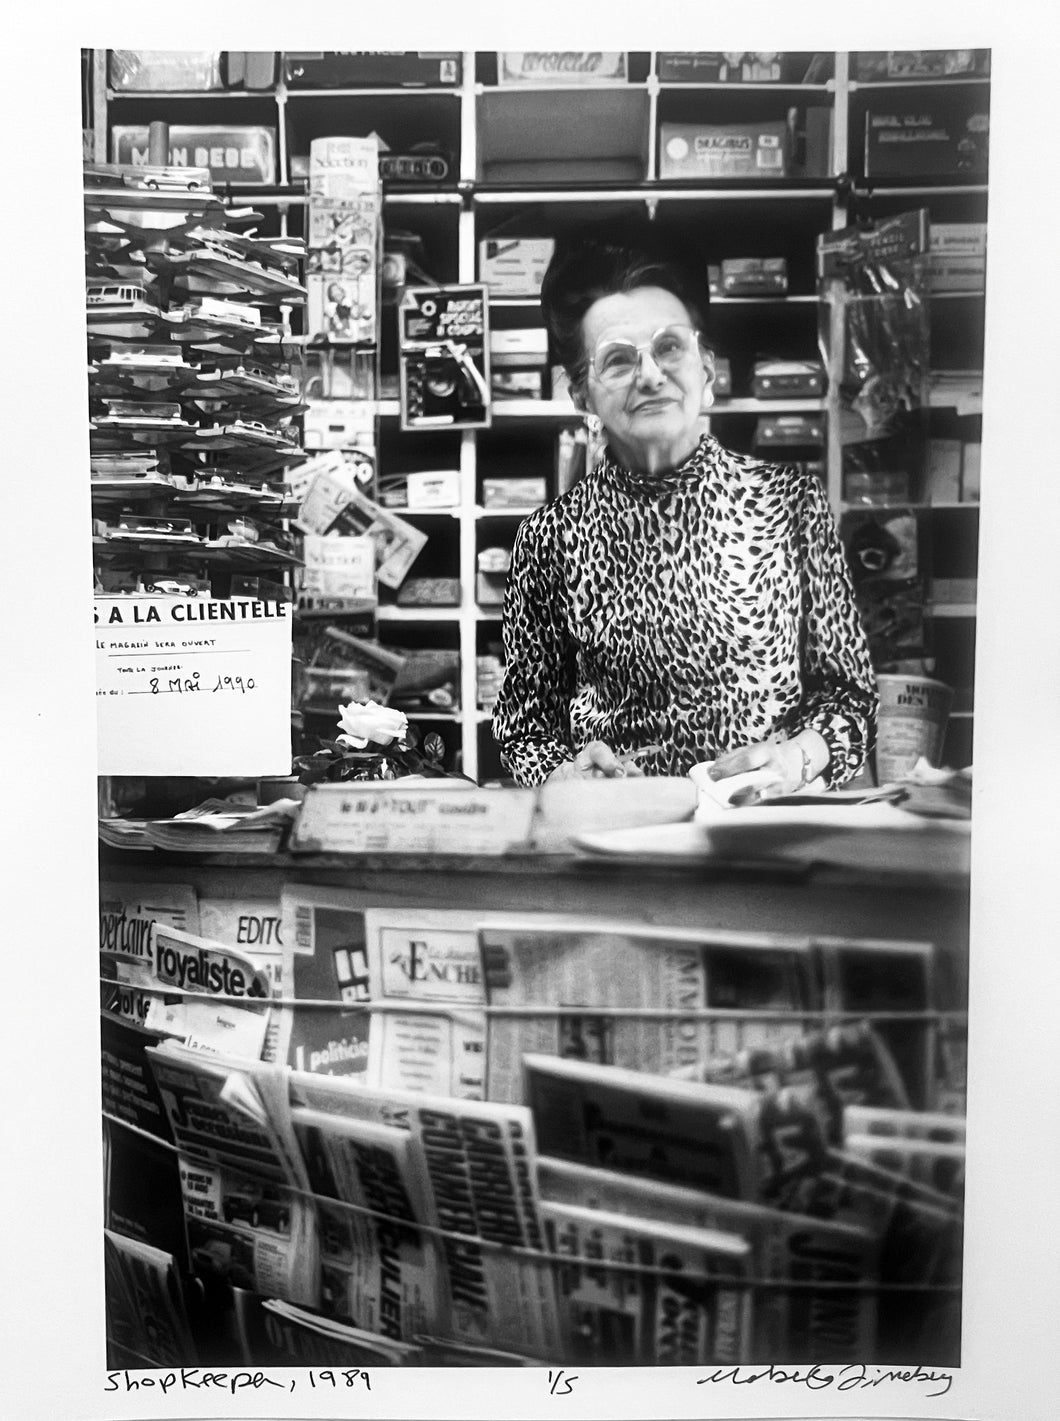 Shopkeeper by Roberta Fineberg, Black-and-White Street Photography Paris, France 1980s